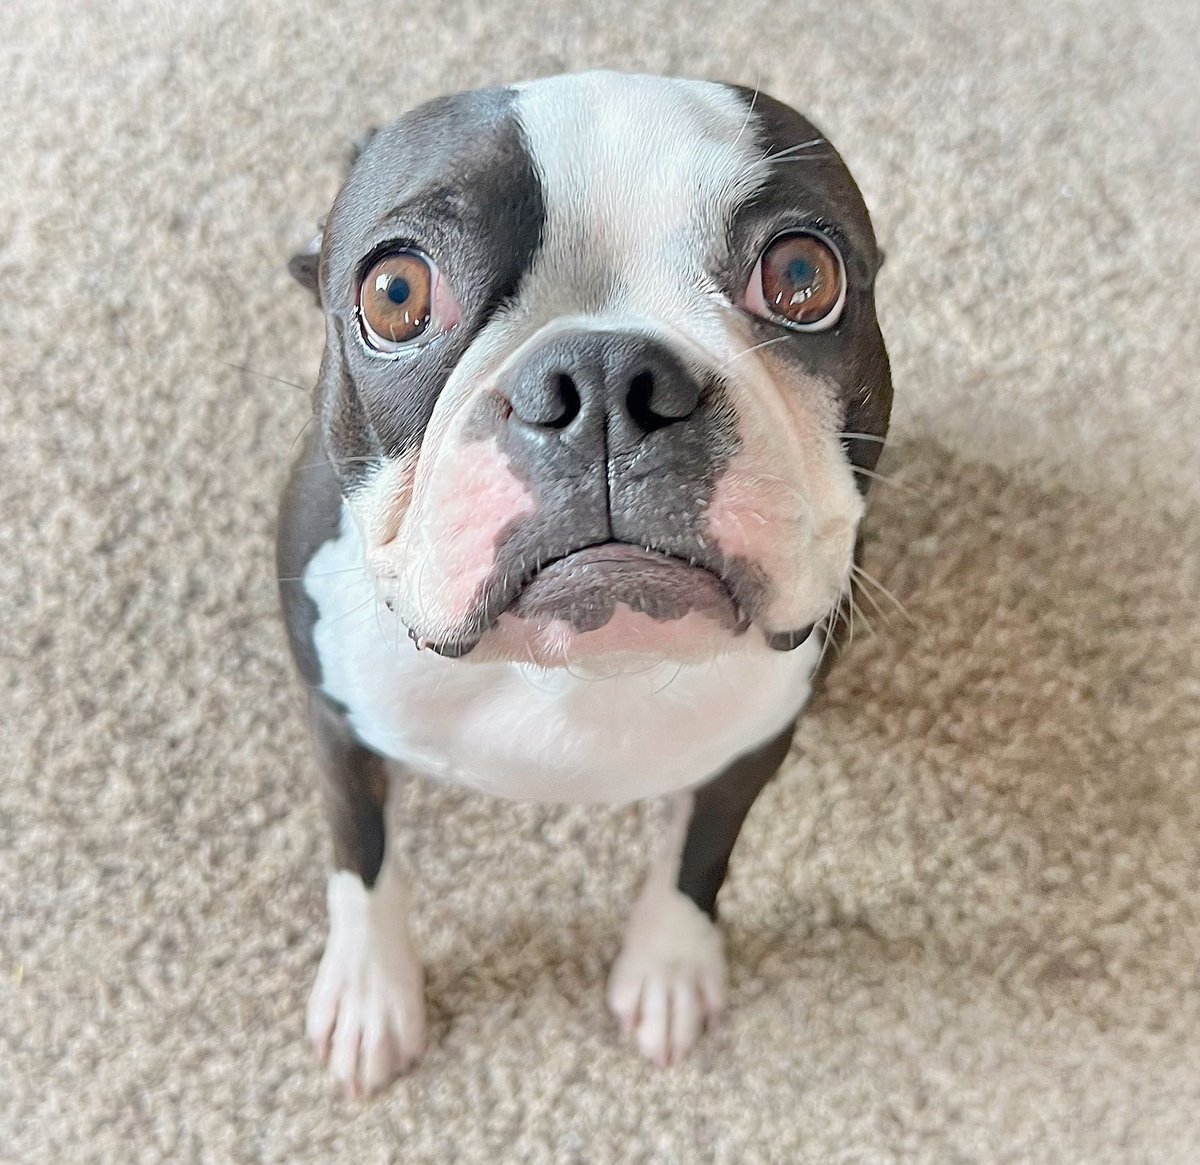 “Please don’t go on errands without me” 🥹
#puppydogeyes #doglover #bostonterrier #dogsftwitter